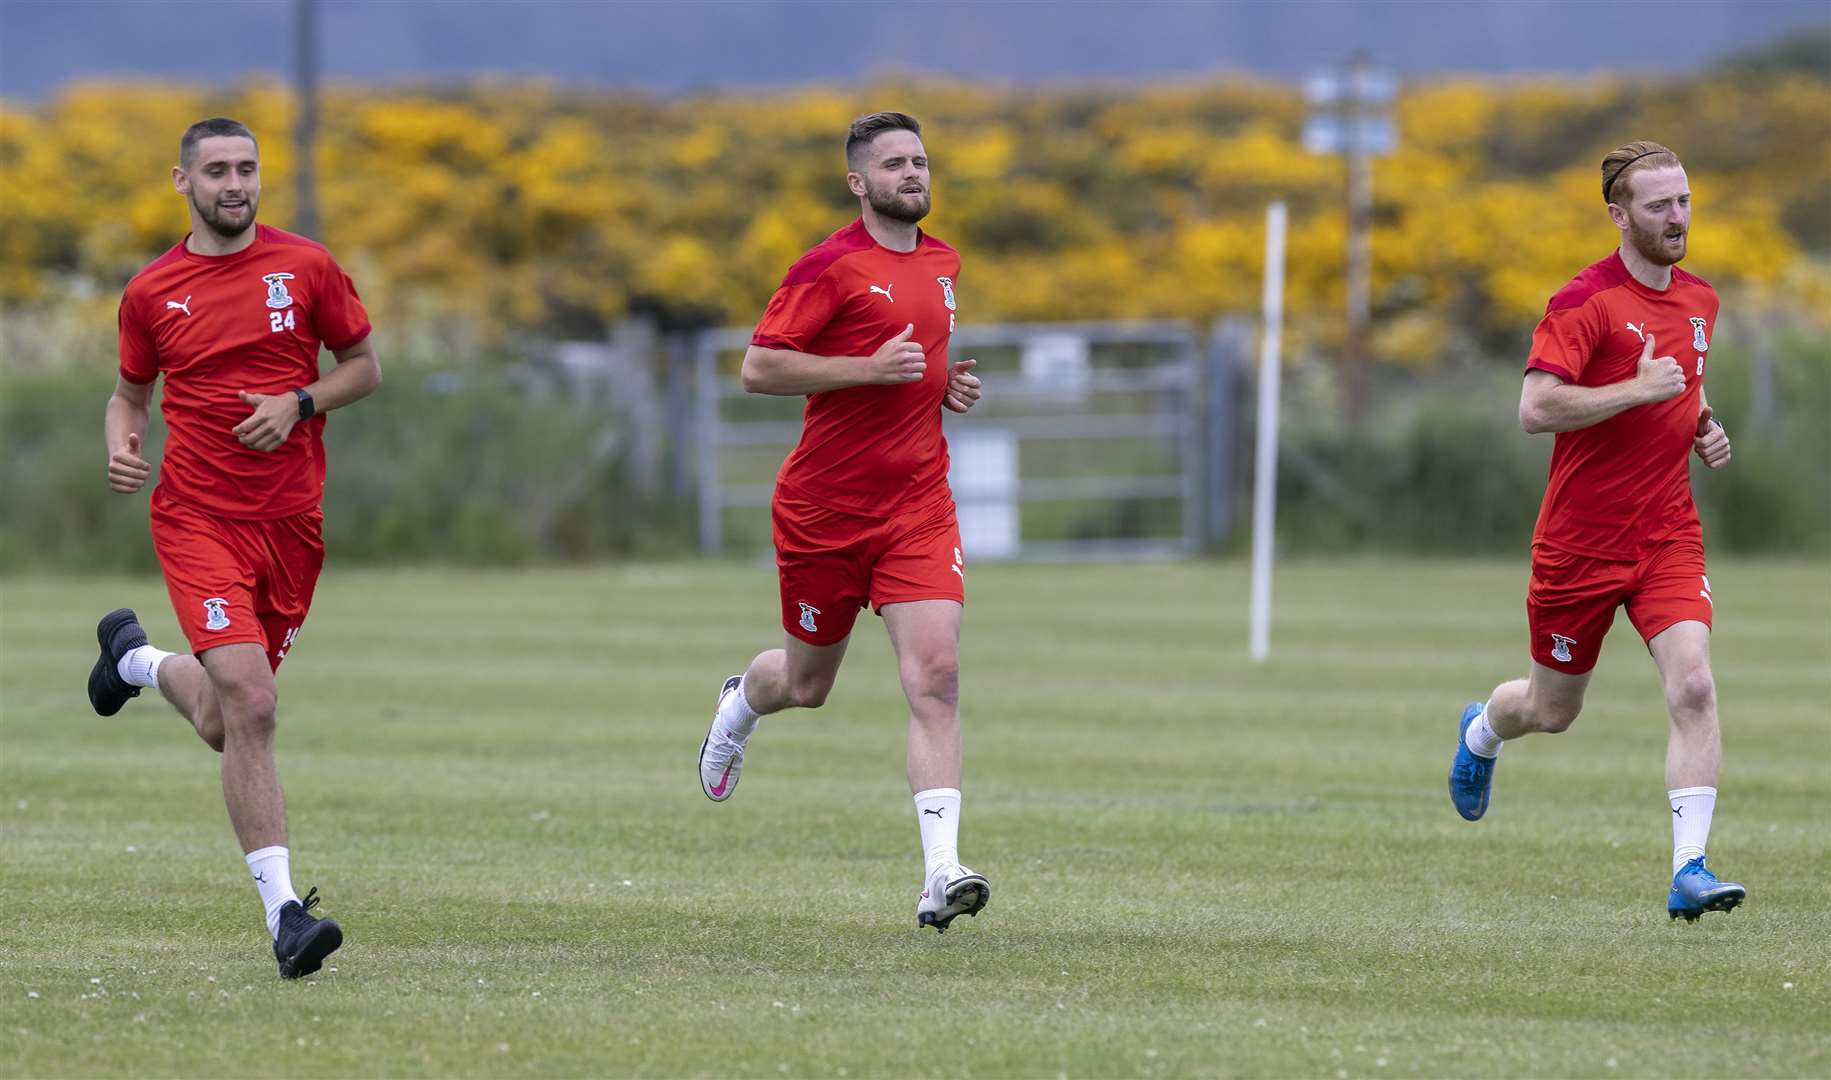 Picture - Ken Macpherson, Inverness. See story. Inverness CT’s 1st day back at training at Fort George for the new season ahead. Having fun are (l to r) Robbie Deas, Danny Devine and David Carson.